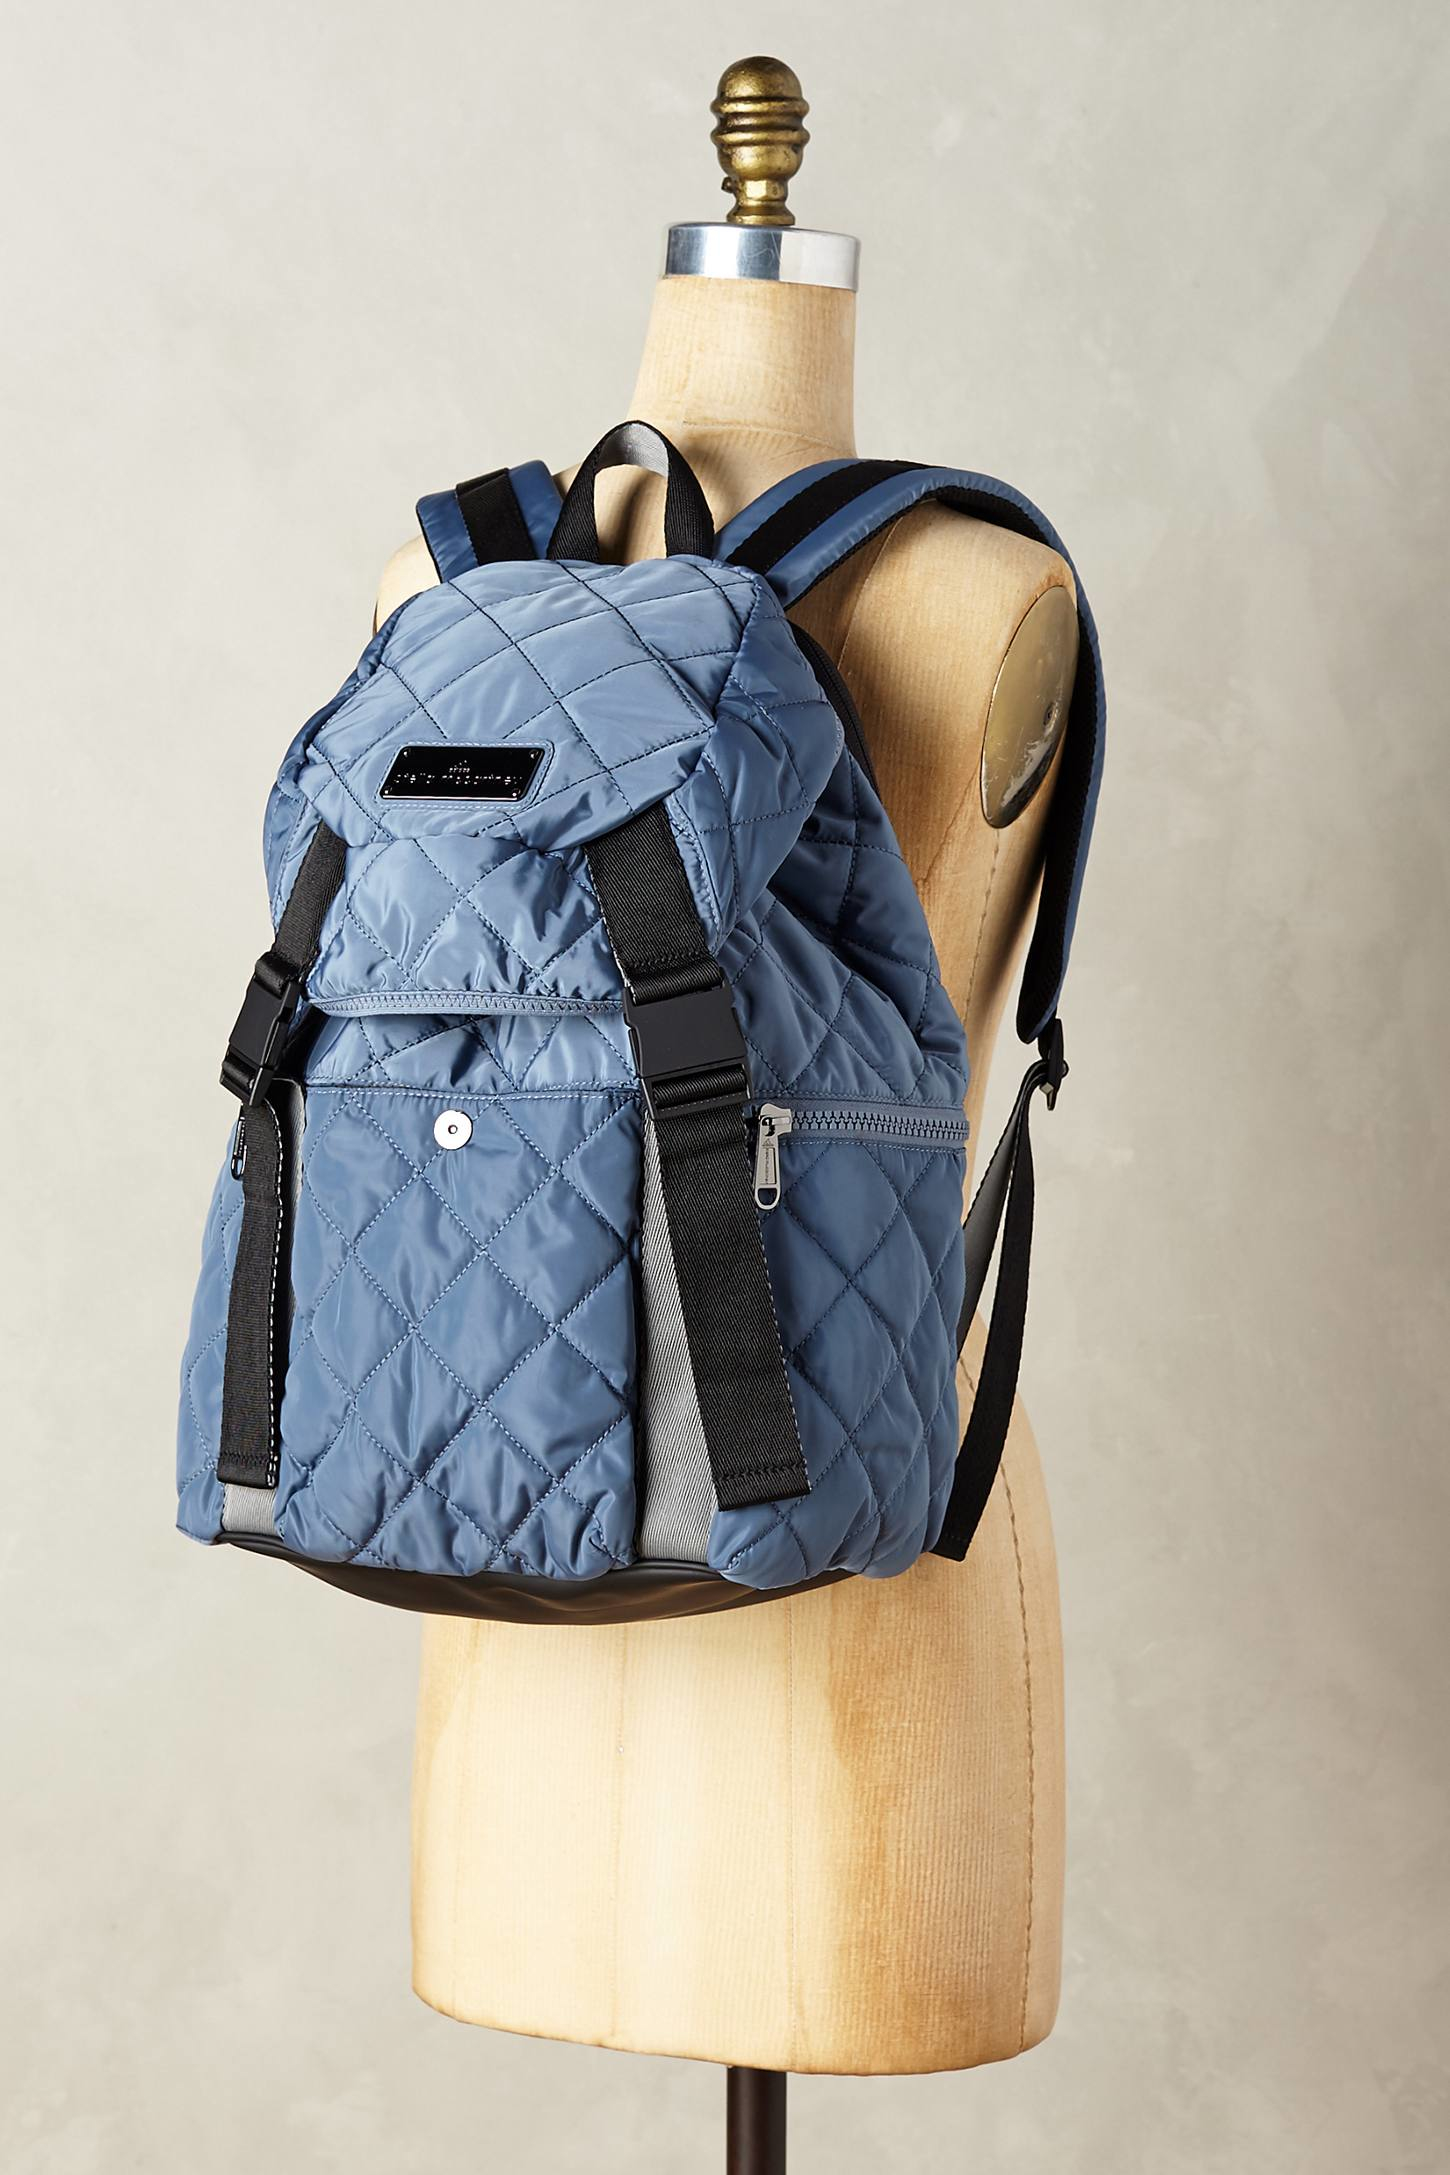 Lyst - Adidas By Stella Mccartney Quilted Backpack in Blue